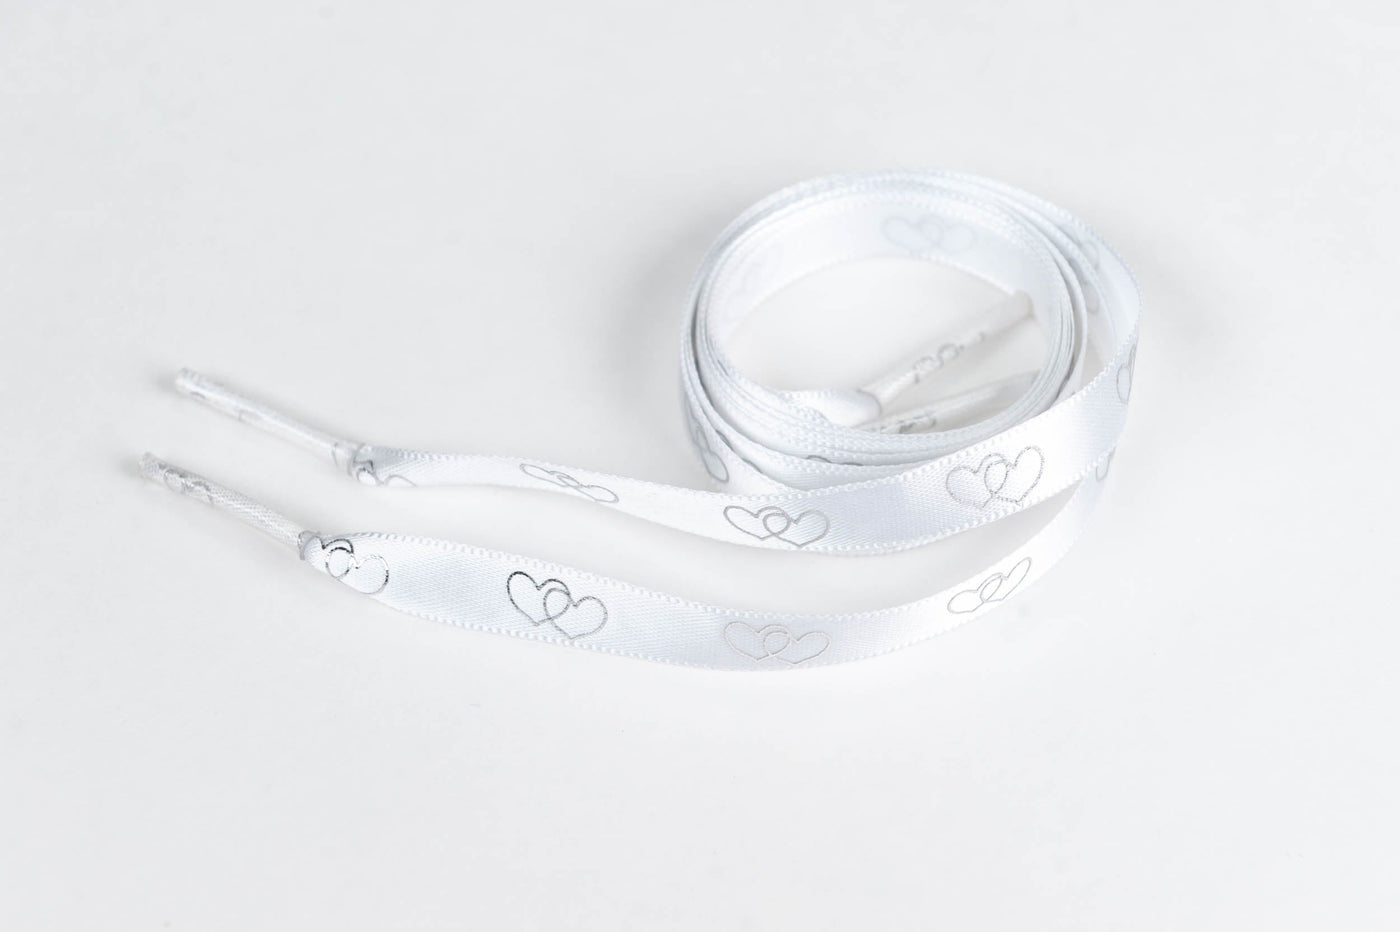 Shoelaces Silver Double Hearts on White Satin Ribbon 3/8" Wide Shoelaces by Princess Pumps